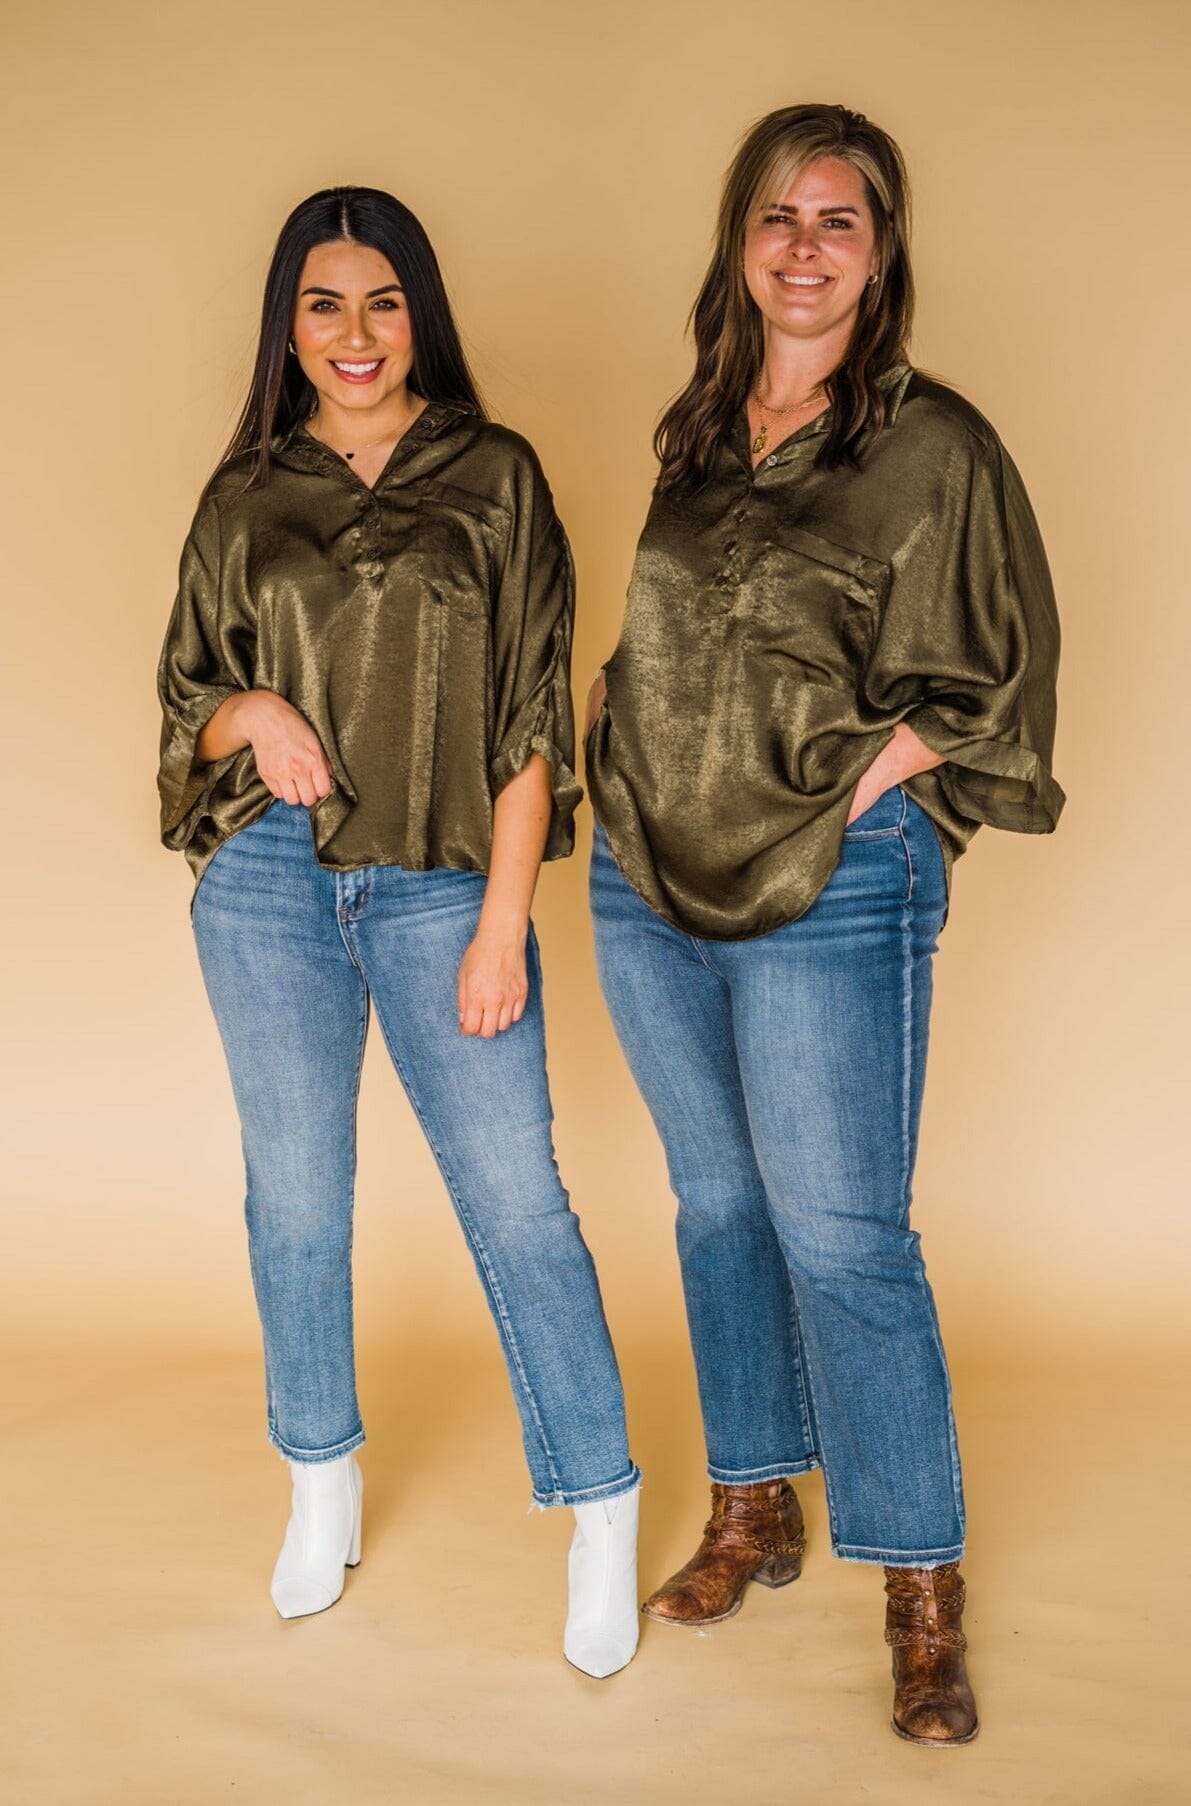 The Silky Way Olive Blouse